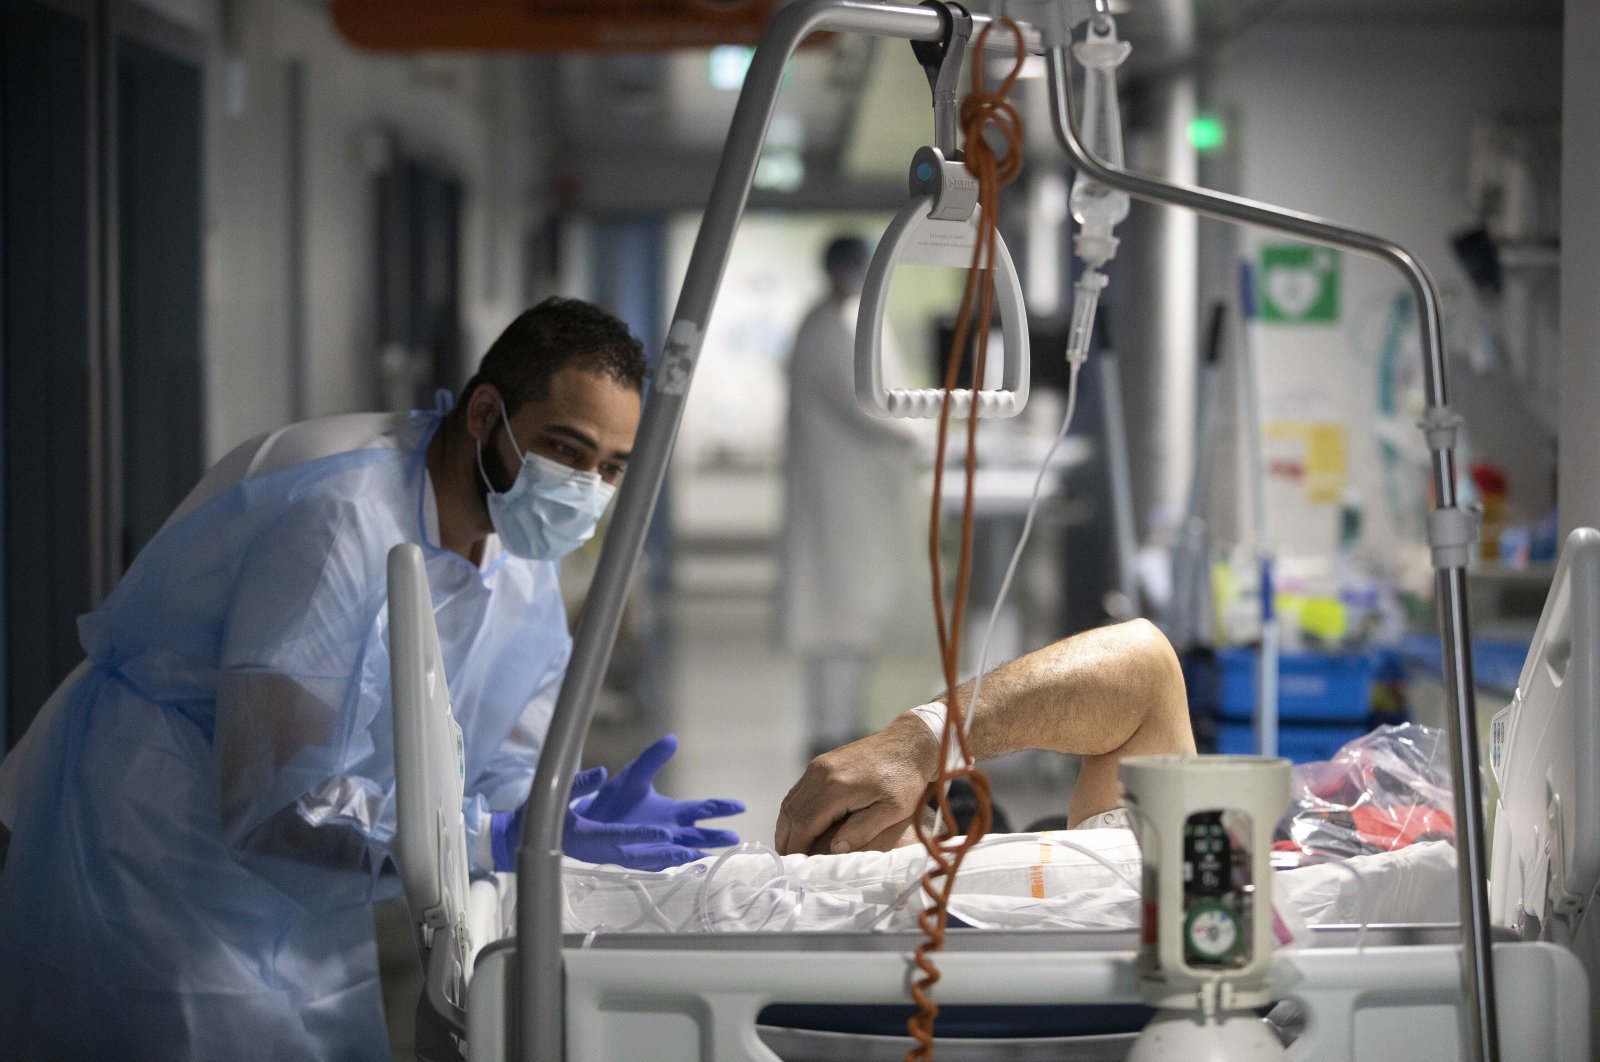 A medical staff member speaks with a COVID-19 patient in the infectious disease ward of the Strasbourg University Hospital, eastern France, Jan. 13, 2022. (AP Photo)